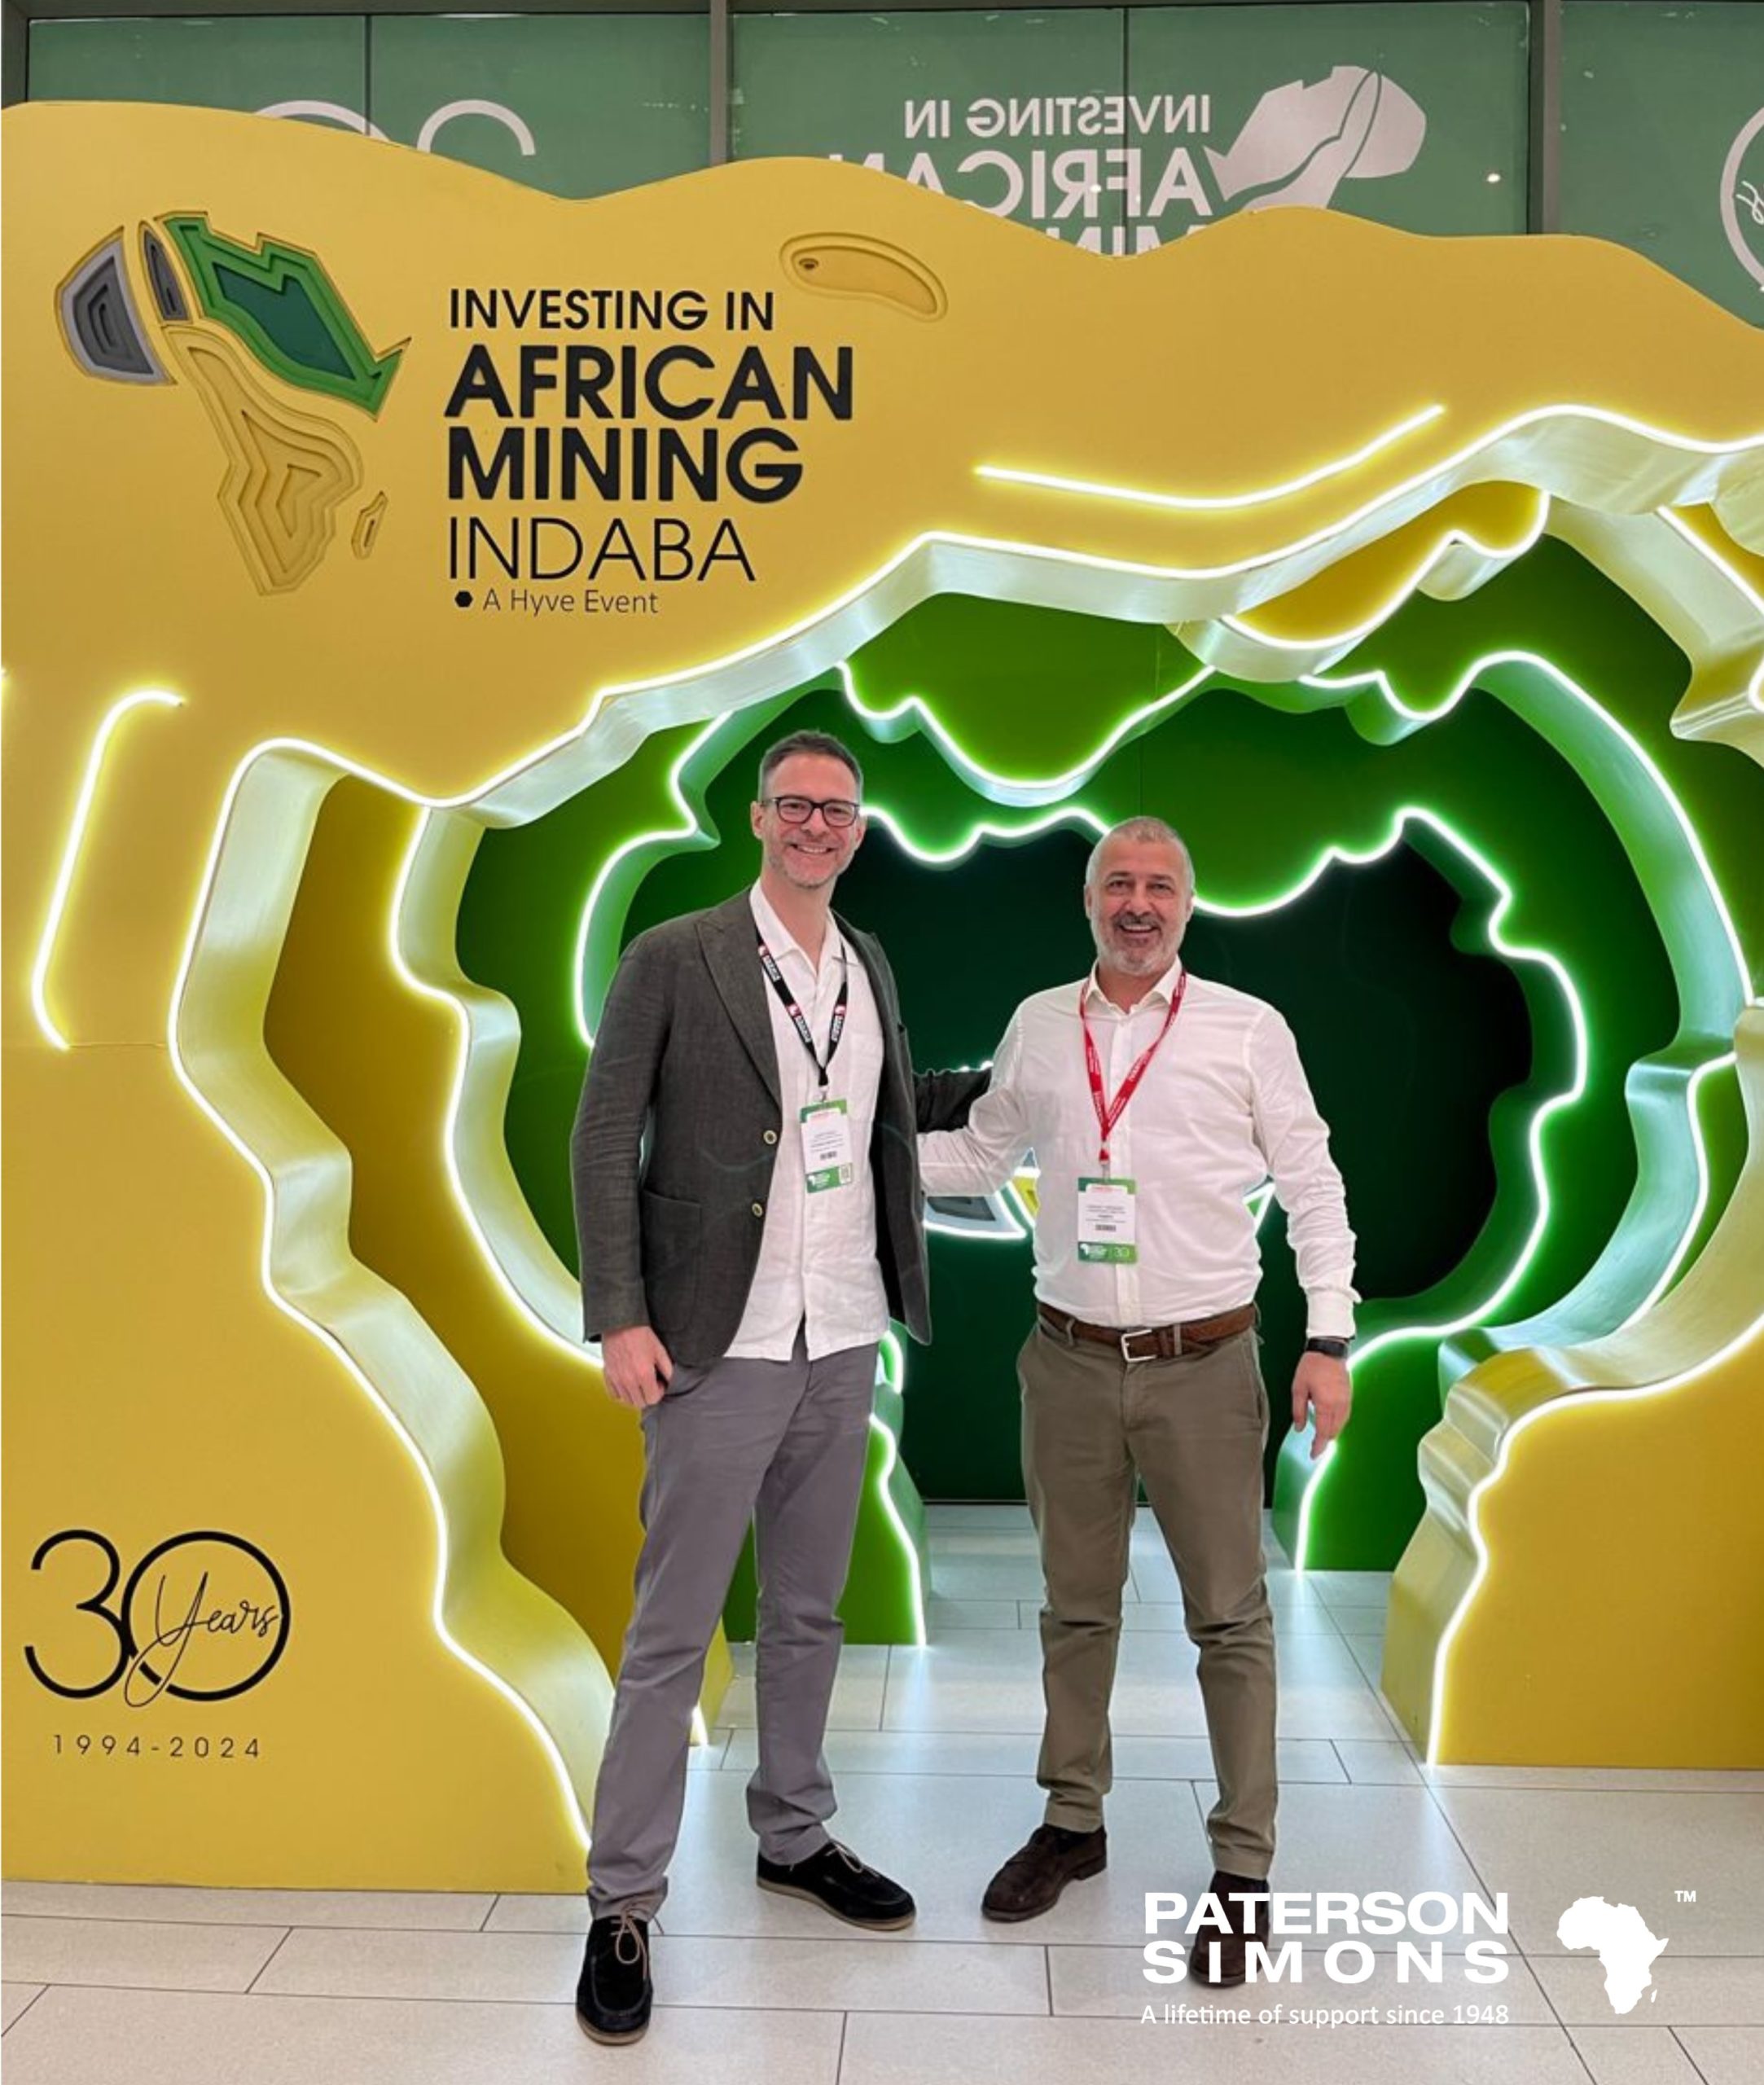 PATERSON SIMONS ATTENDS THE INVESTING IN AFRICAN MINING INDABA 2024